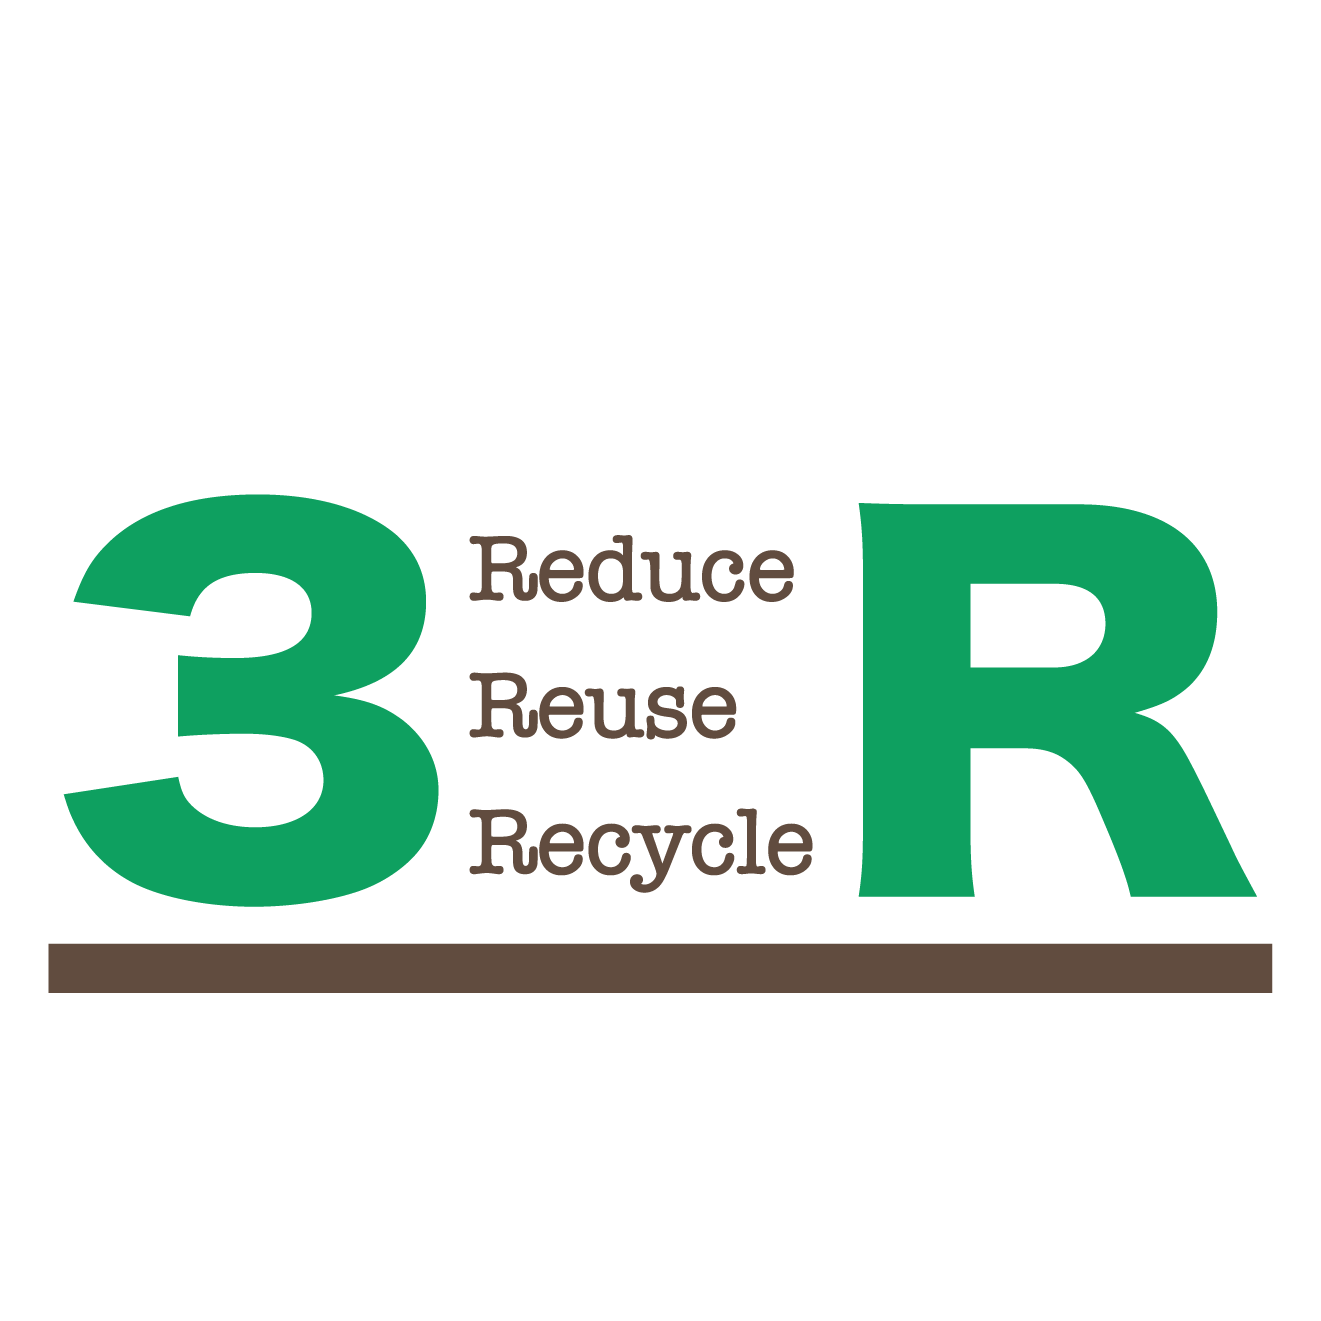 3r Reduceリデュース Reuseリユーズ Recycleリサイクル のイラスト 環境問題 商用フリー 無料 のイラスト素材なら イラスト マンション